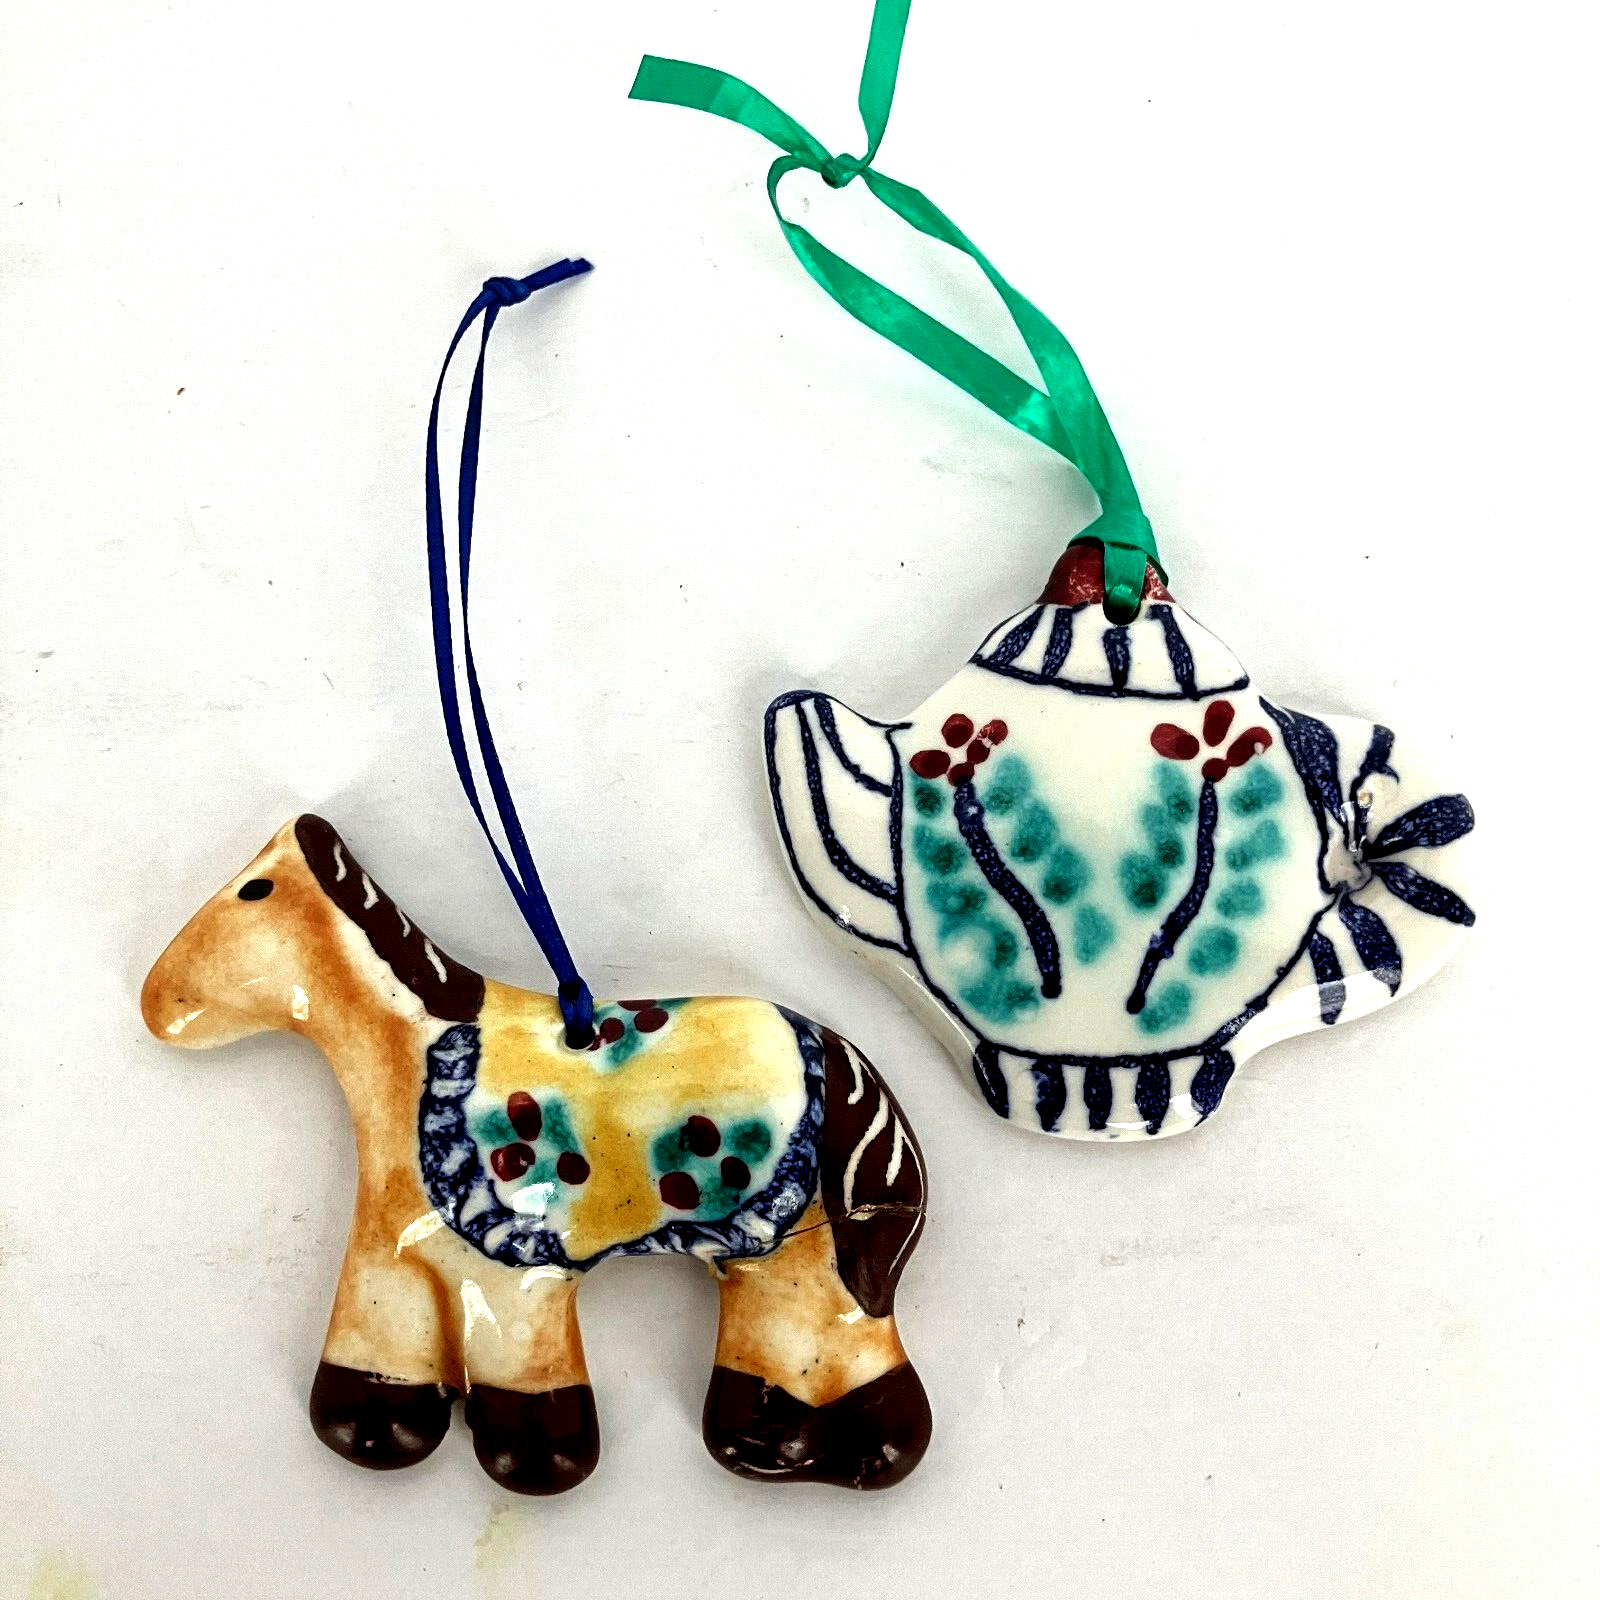 Studio Art Pottery Hand Painted Glazed +Clay Ornaments Pony and Teapot Set of 2